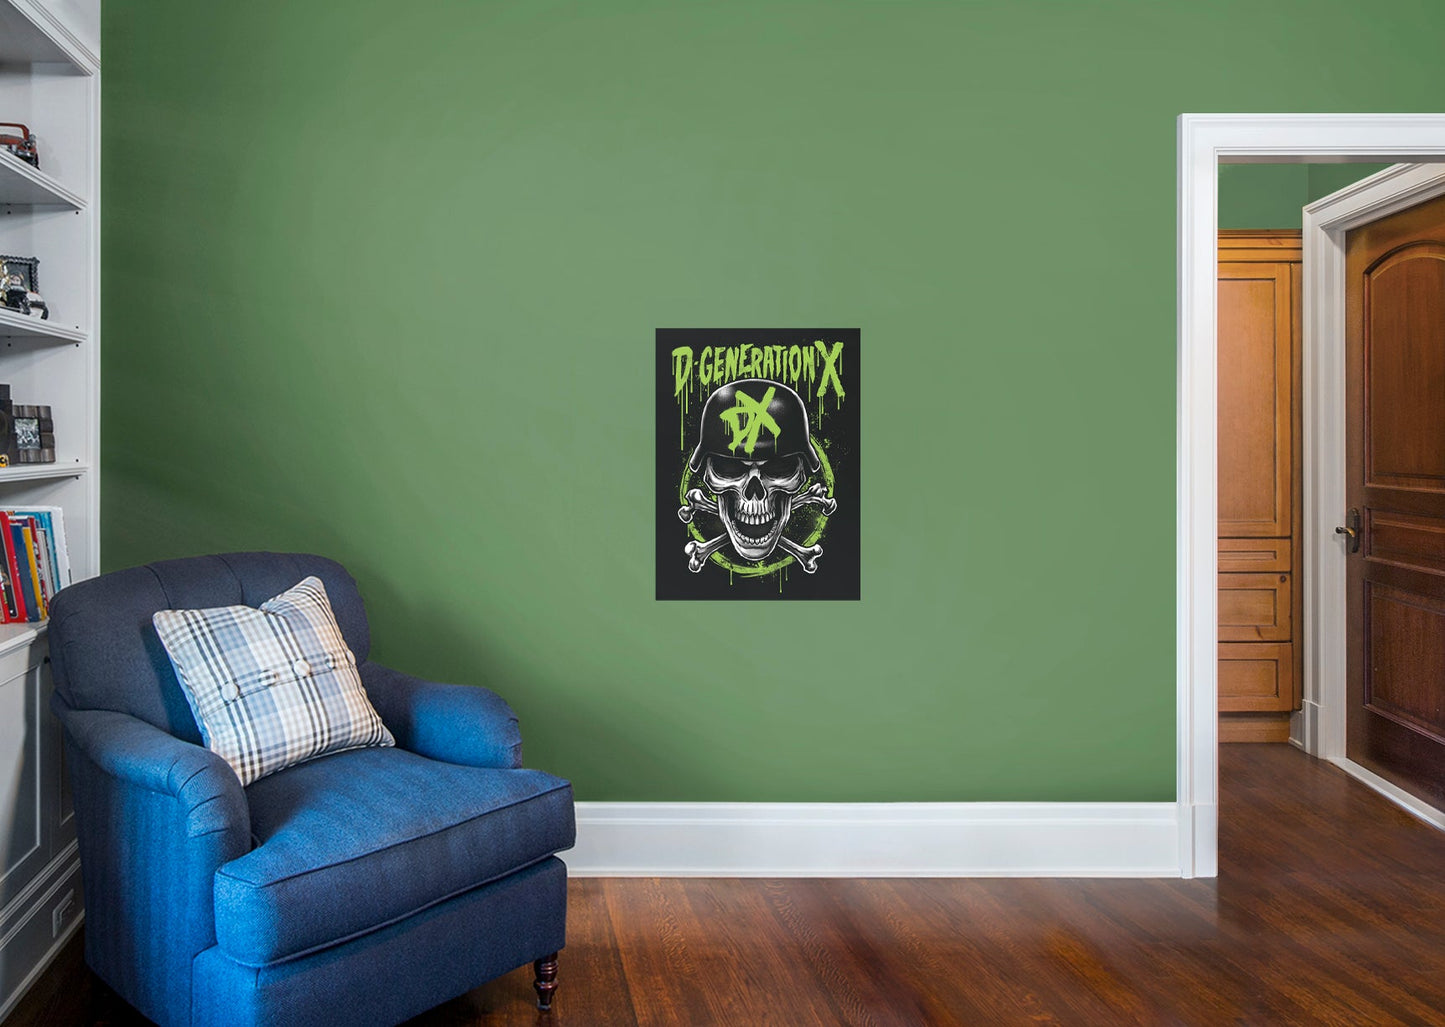 D-Generation X  Mural        - Officially Licensed WWE Removable Wall   Adhesive Decal